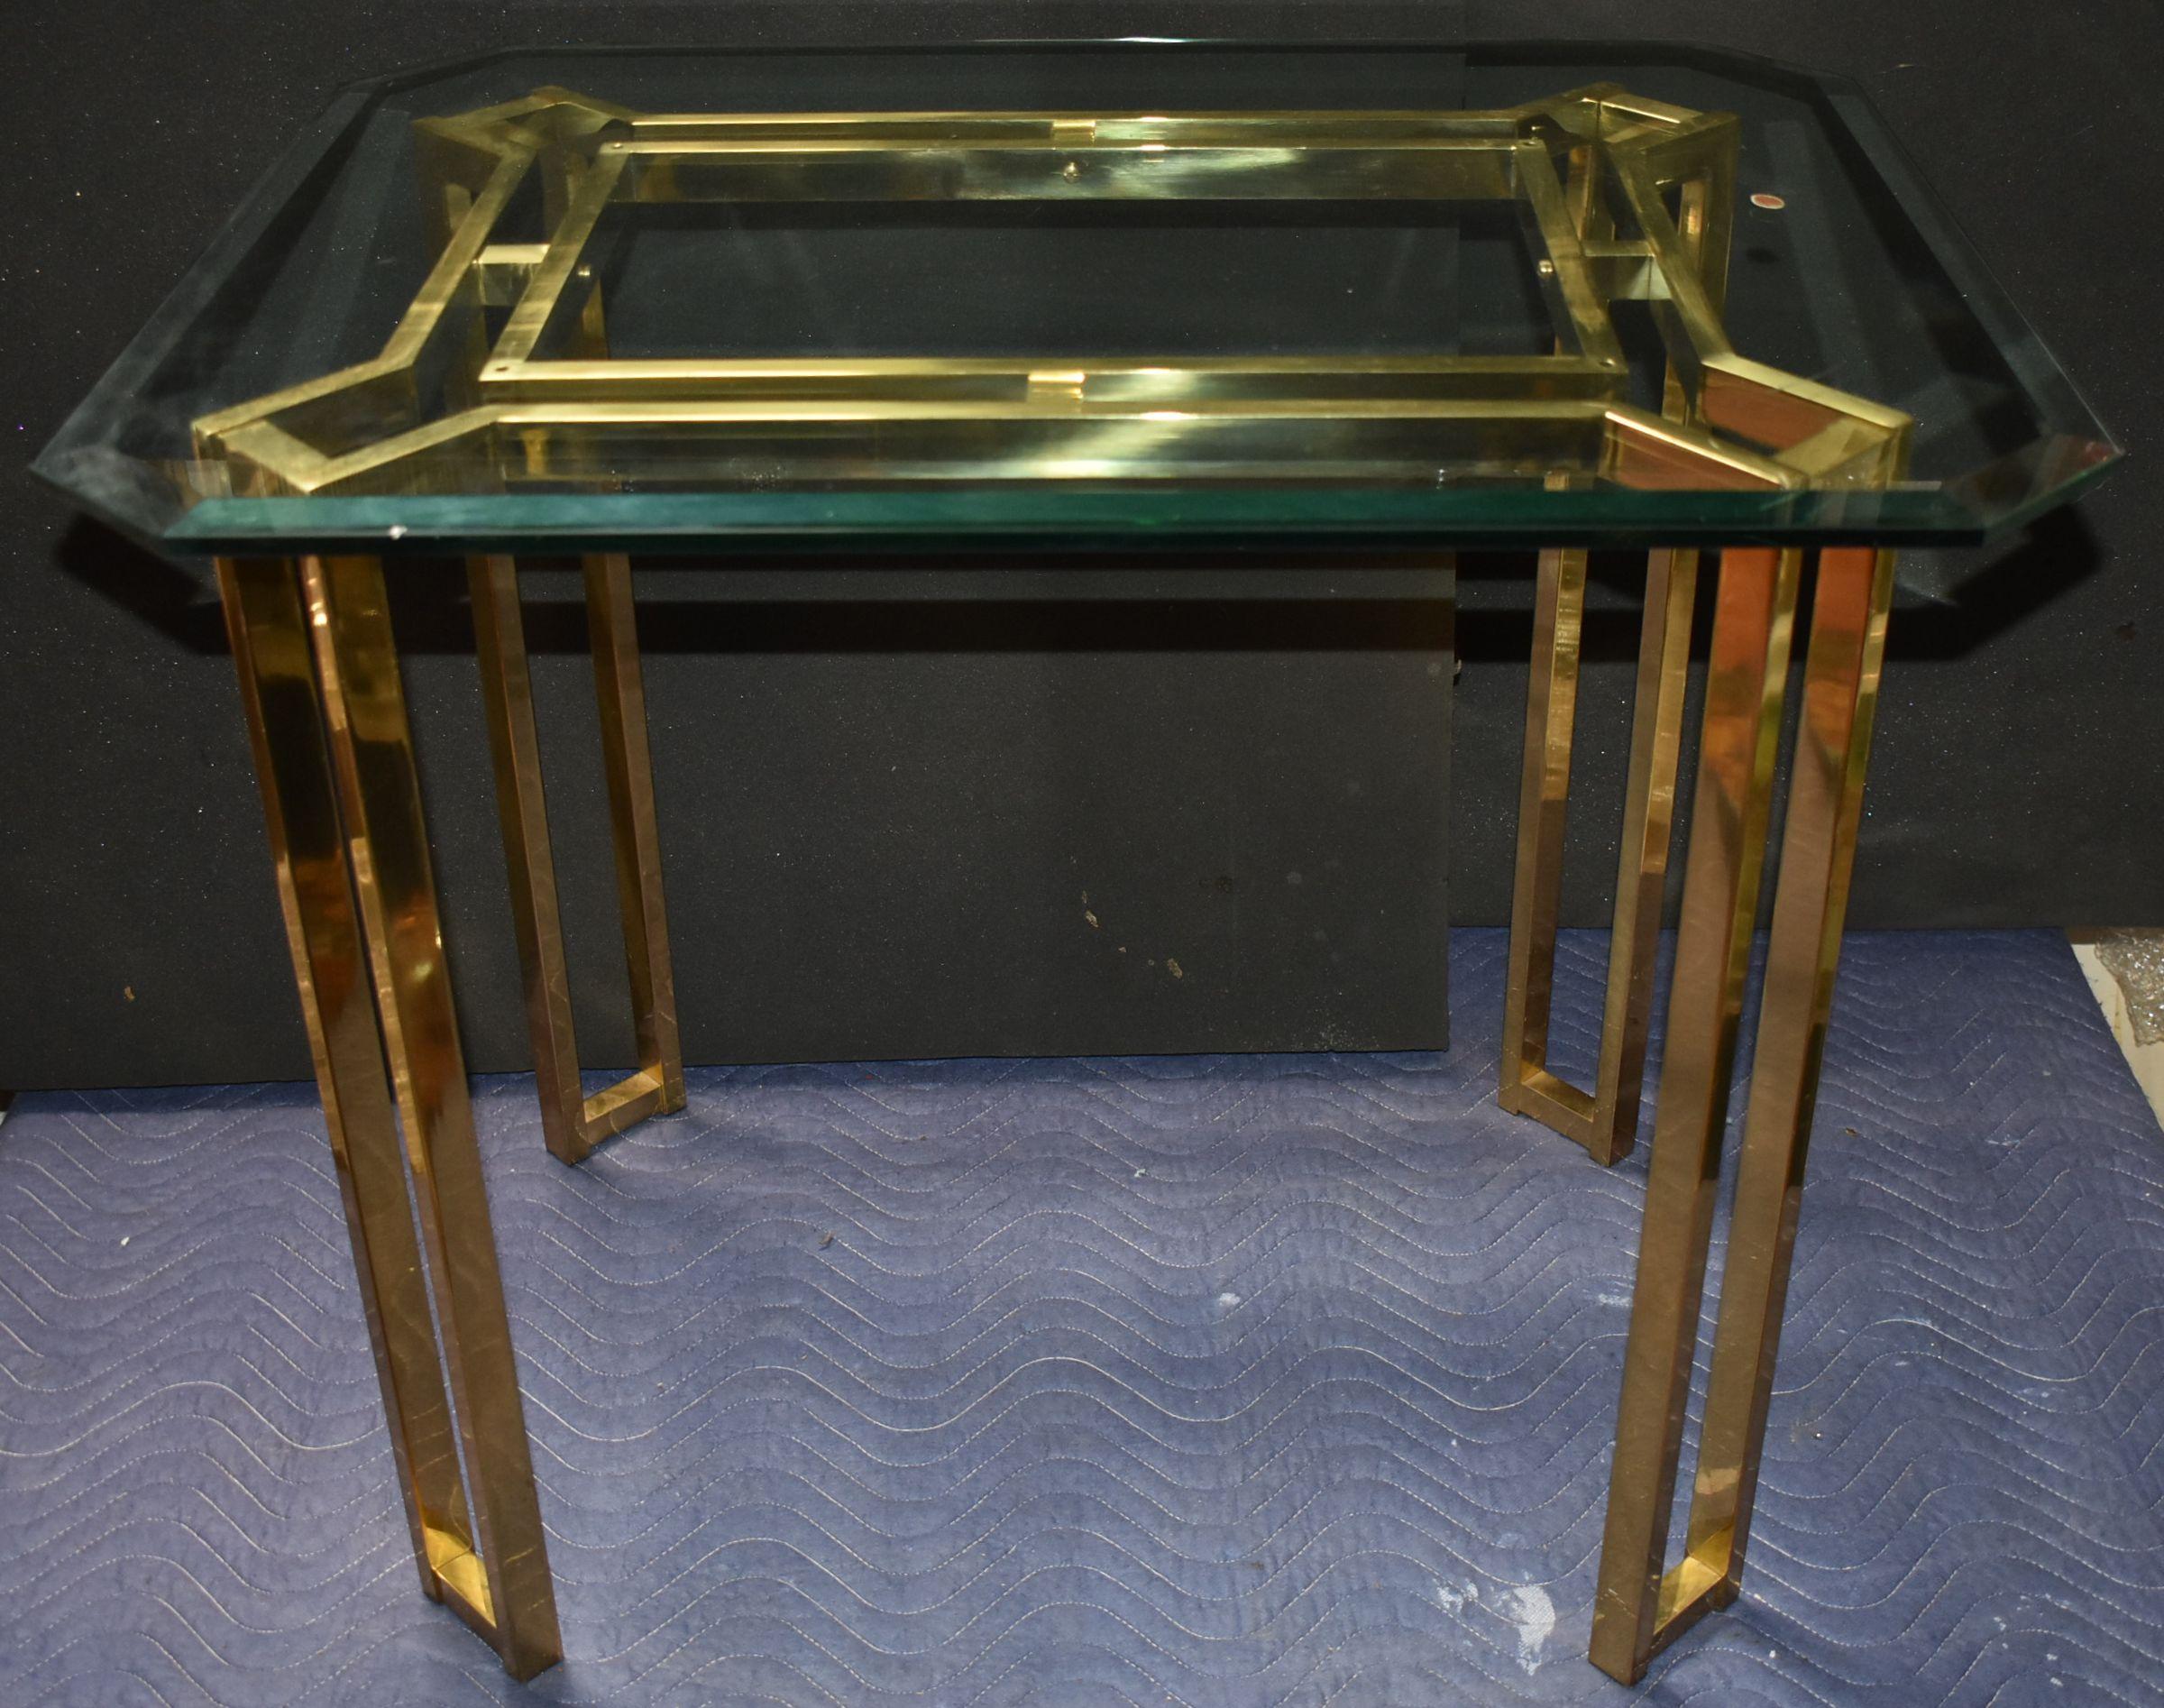 Rectangular design midcentury side table with beveled edge glass top. Come with scratches original top and also we will provide new beveled edge glass top.